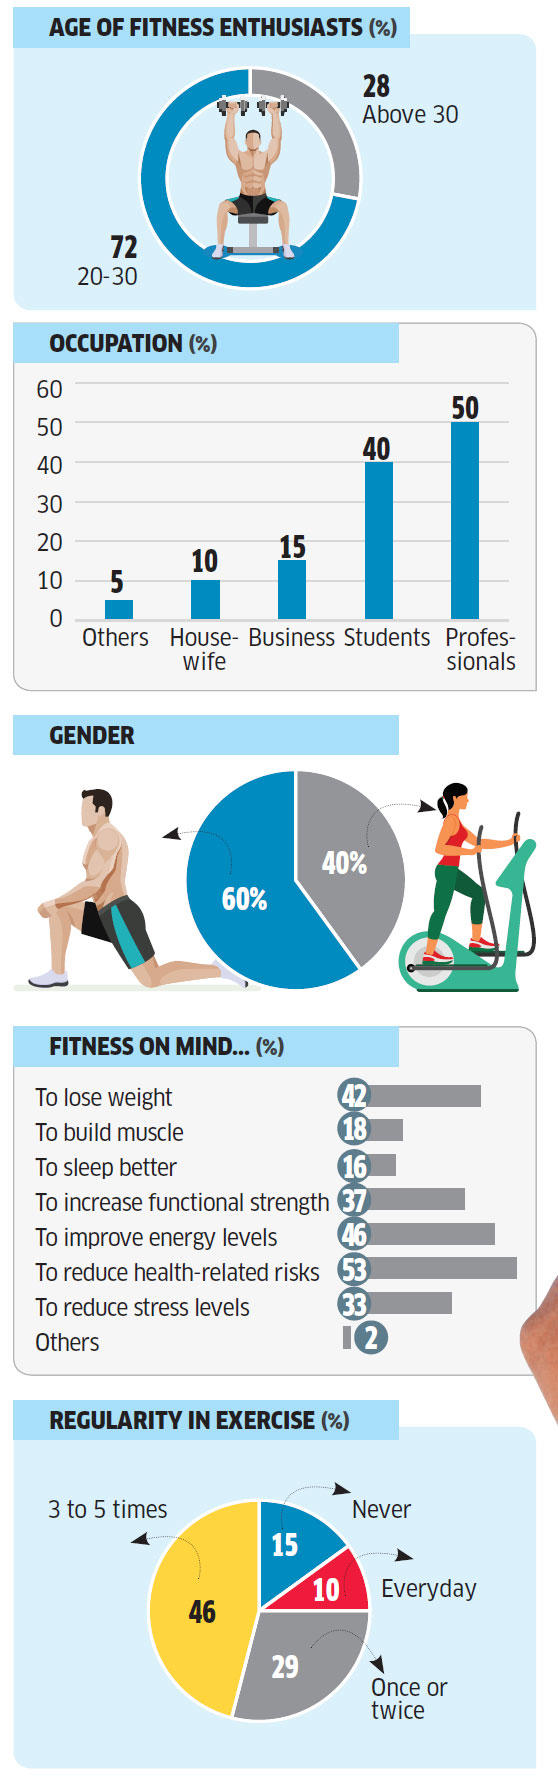 Fit and fine: Retail market for fitness in India likely to touch Rs 7,000cr by year-end